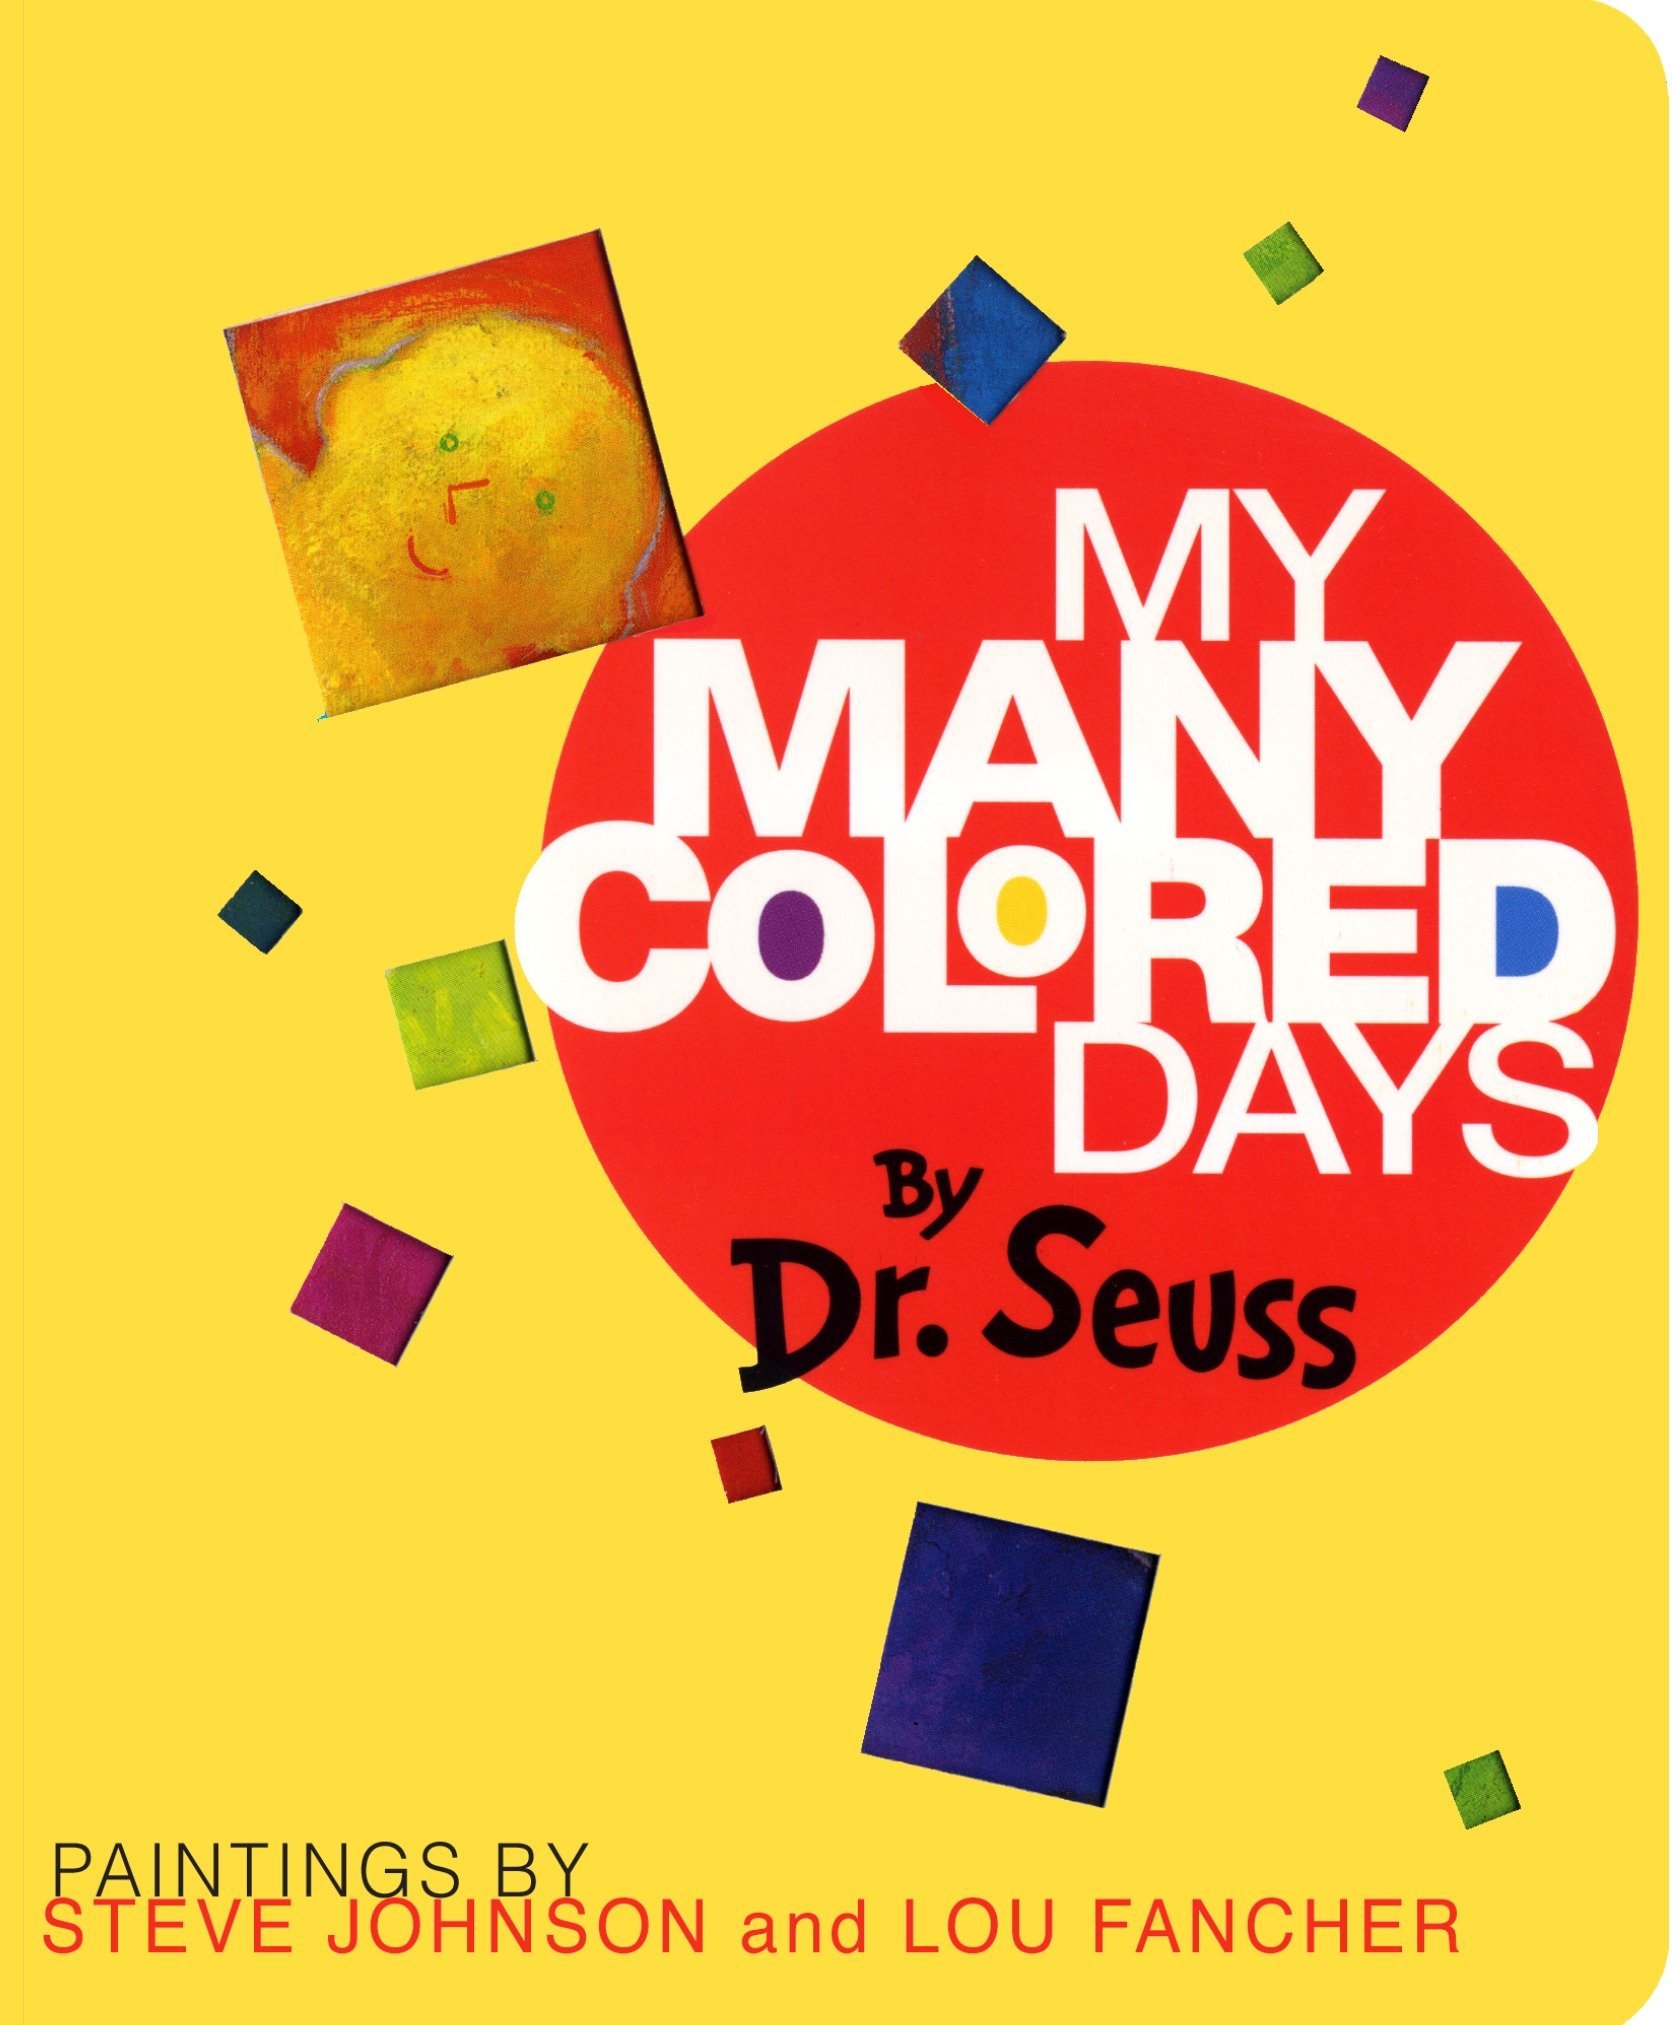 4. 'My Many Colored Days'